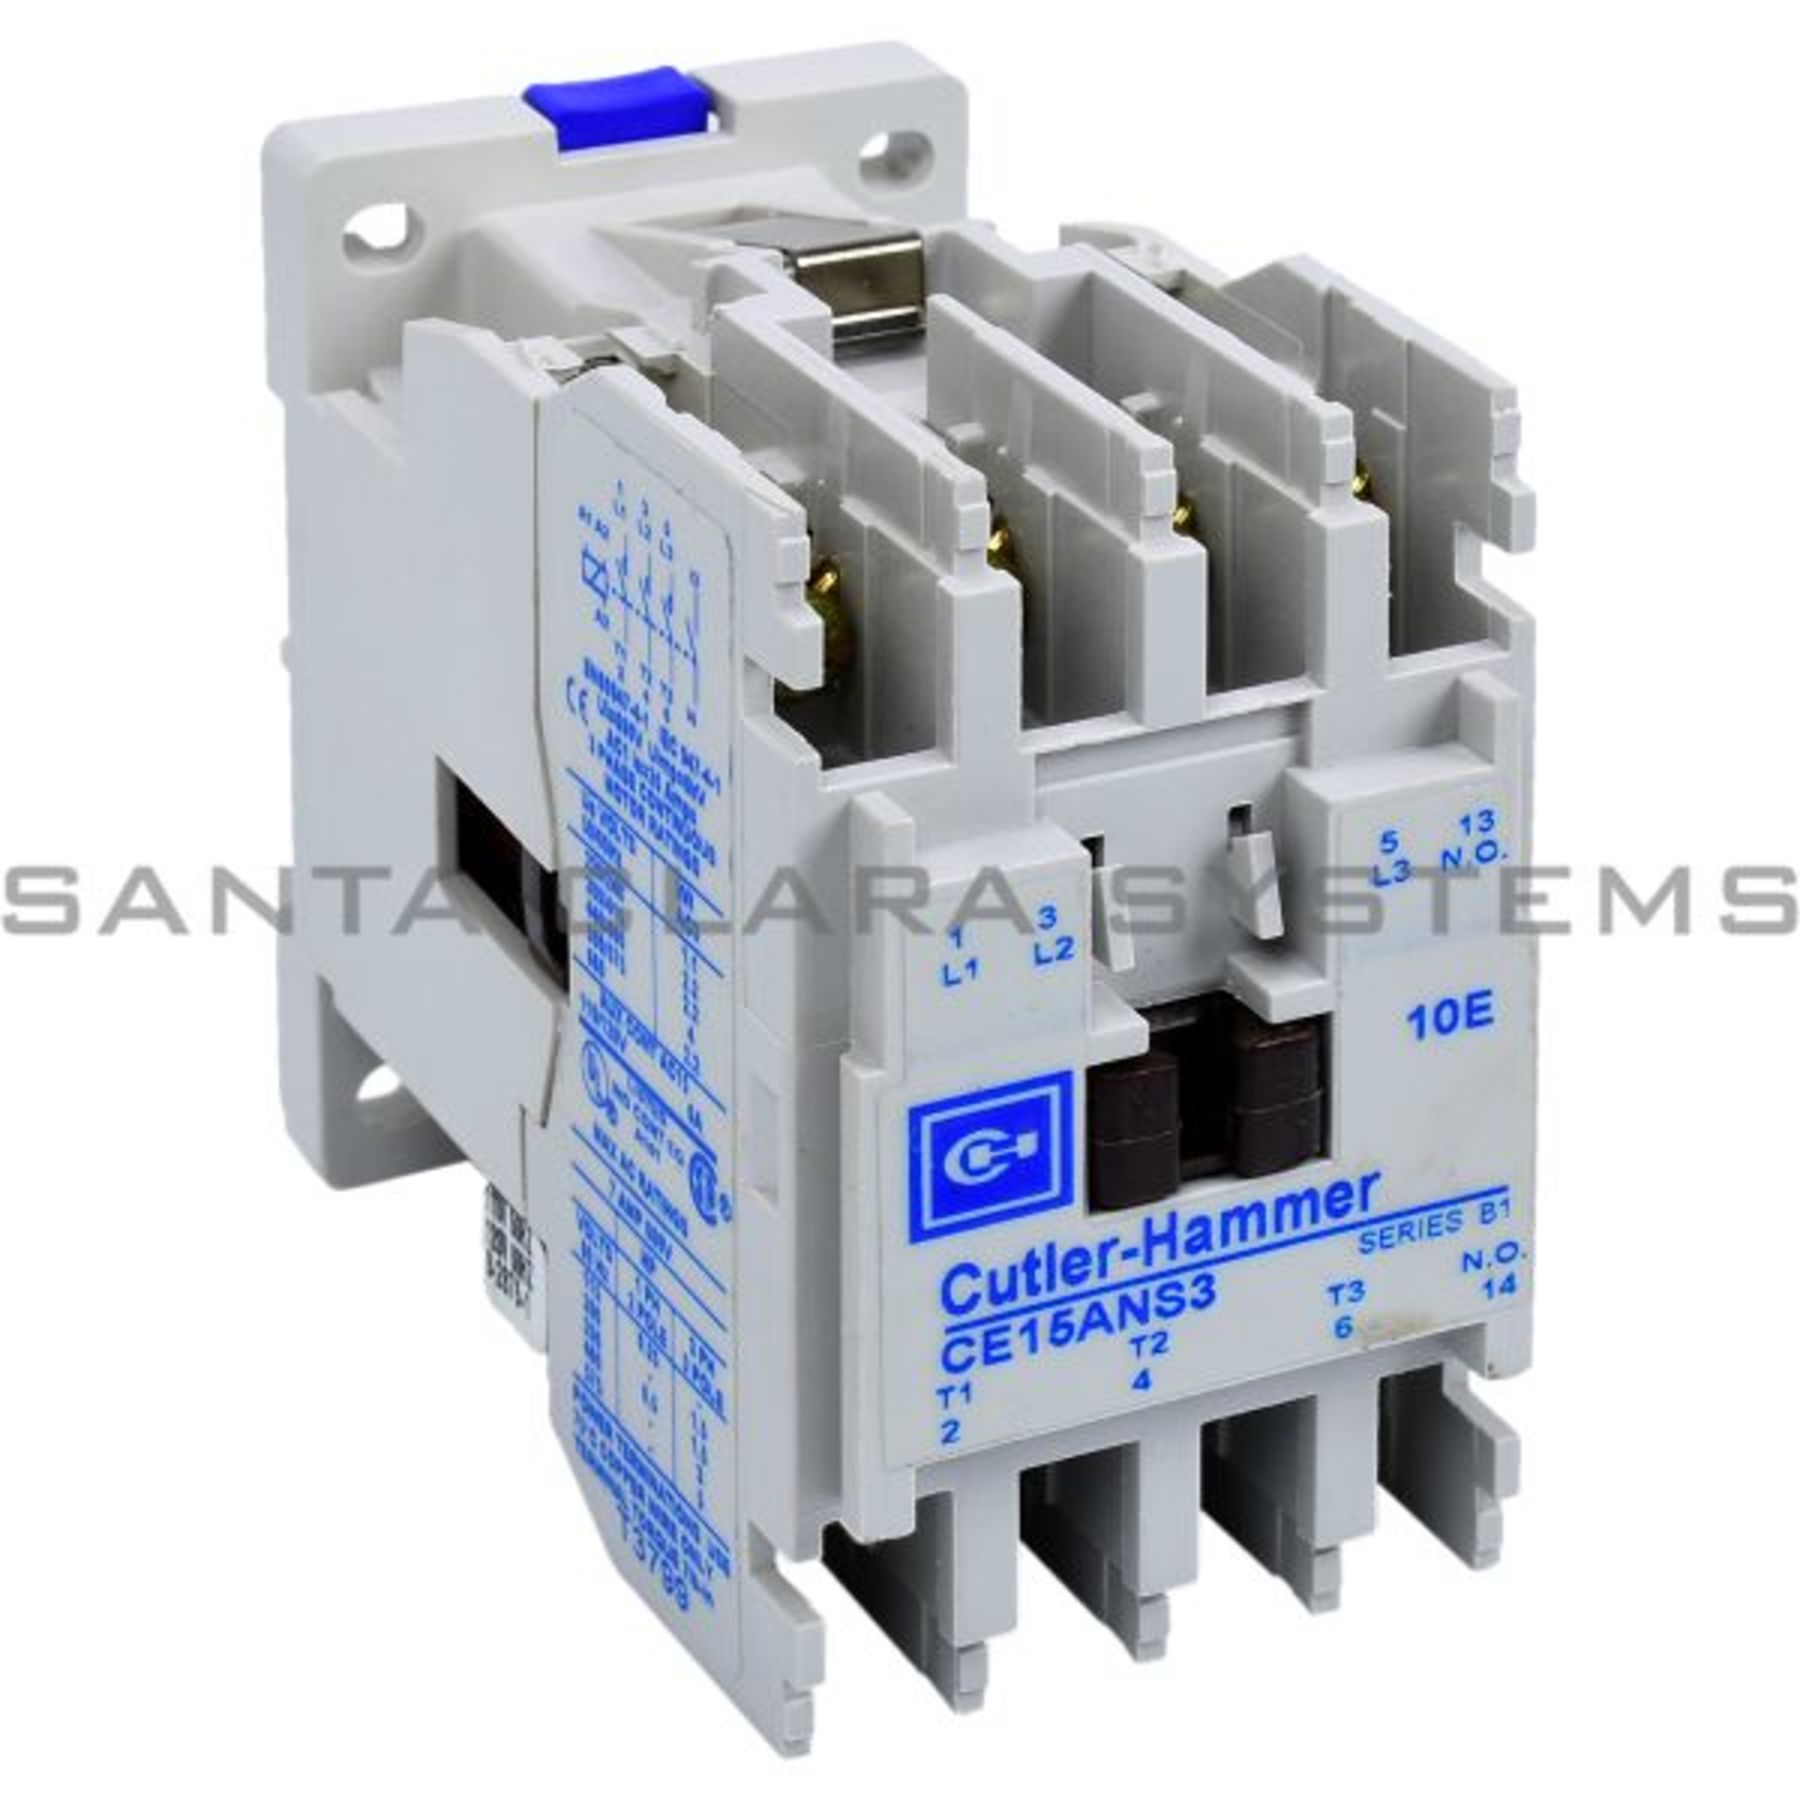 NEW IN BOX Eaton Cutler Hammer CE15ANS3AB Contactor Size A T10 SHIPS FREE 